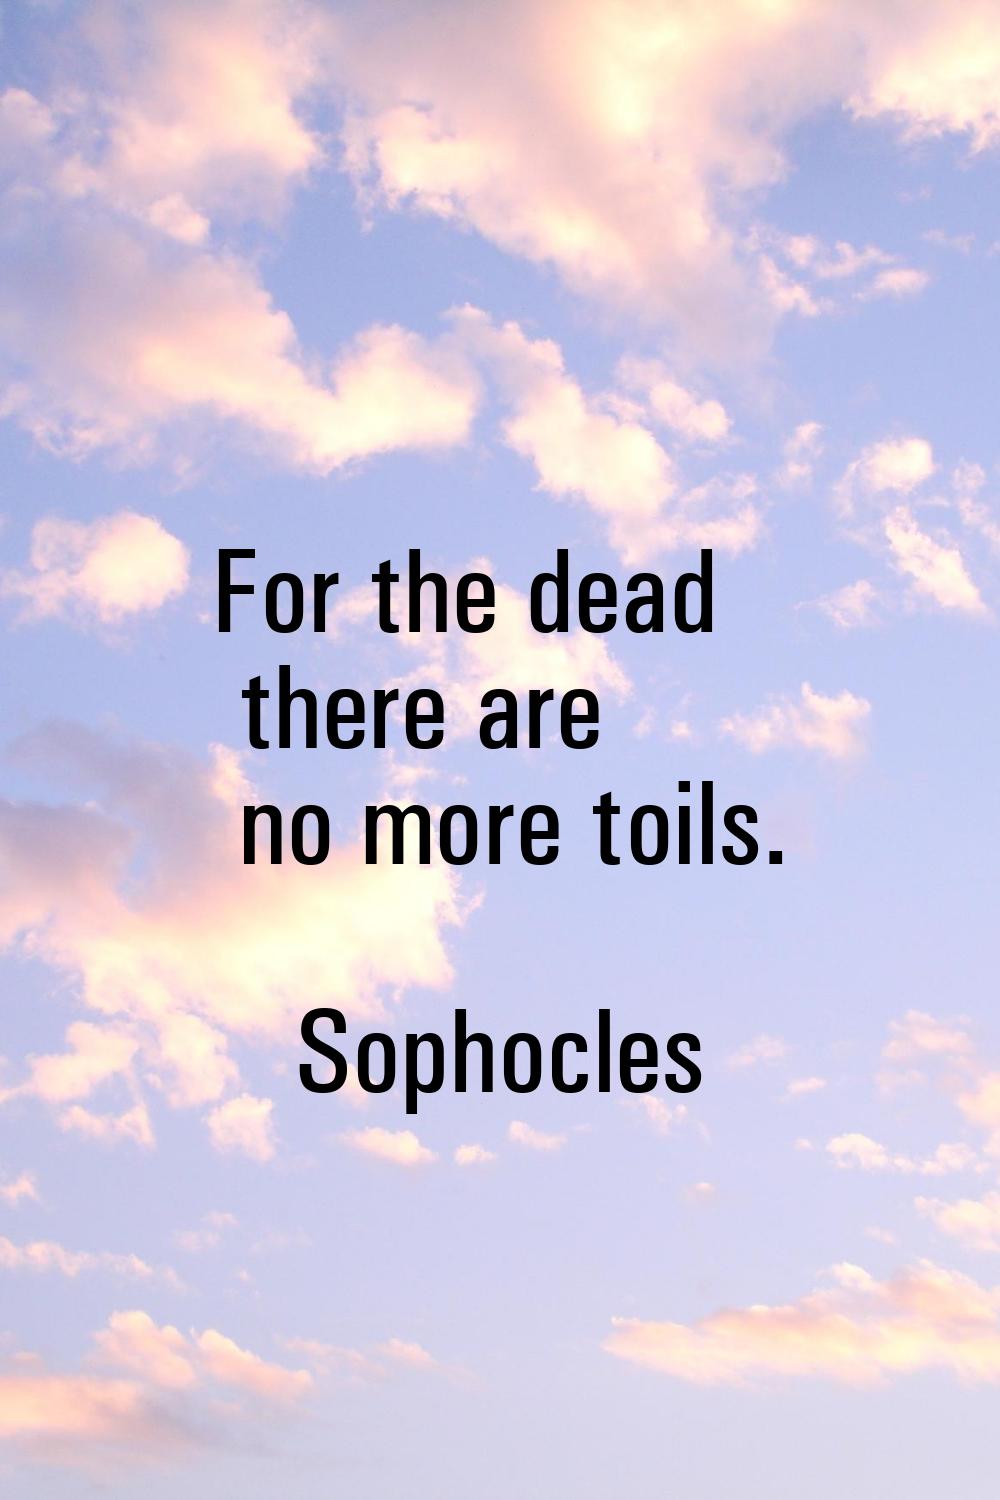 For the dead there are no more toils.